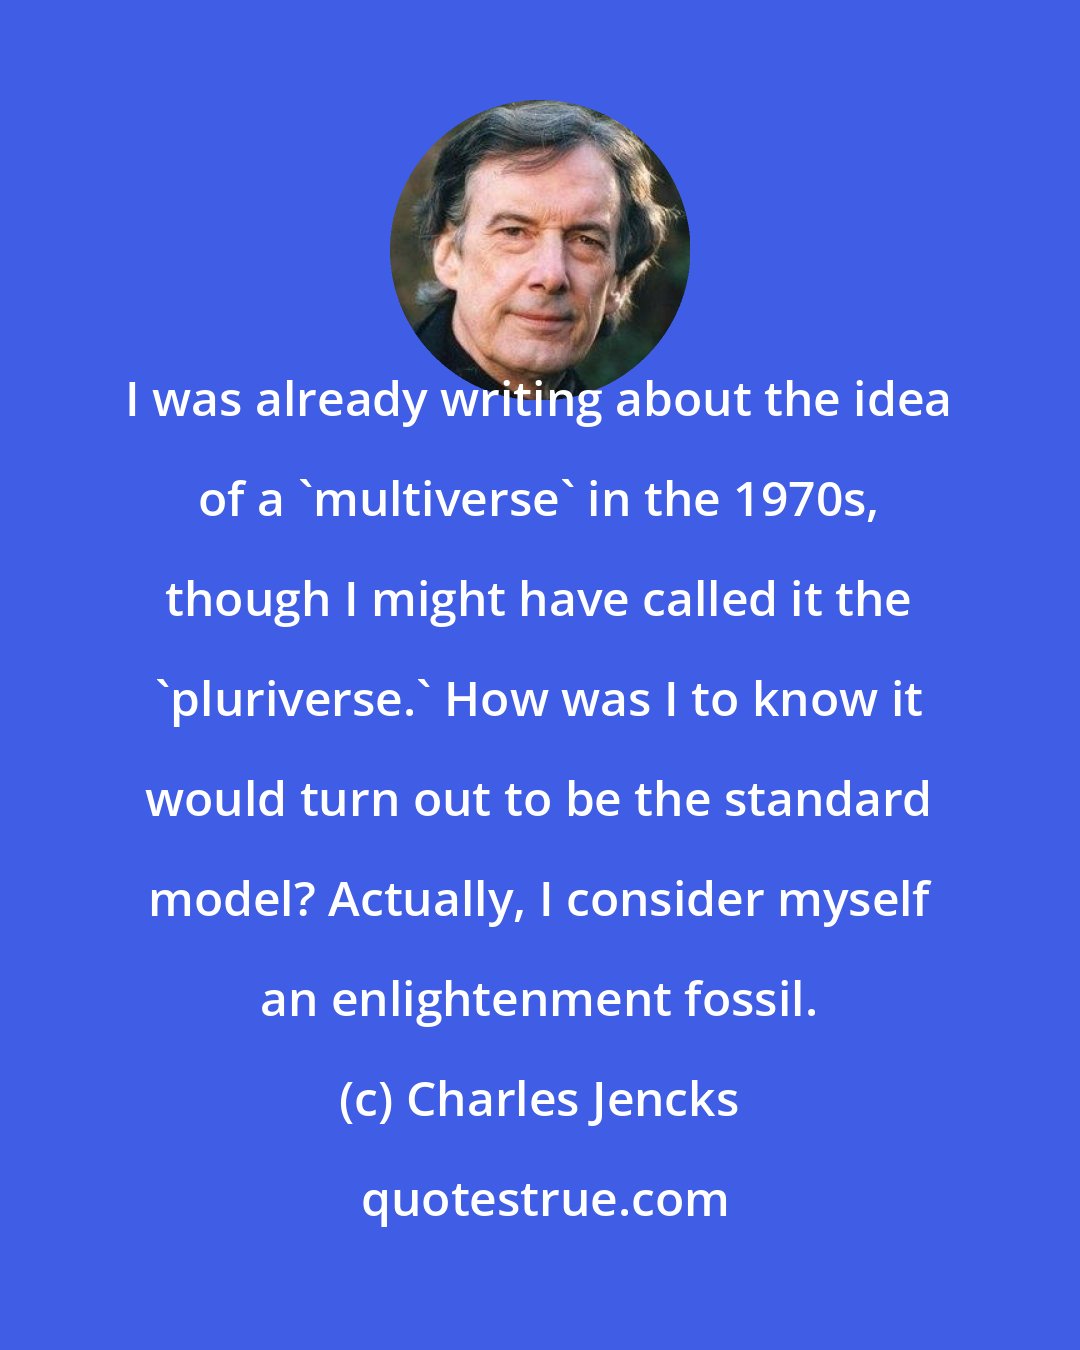 Charles Jencks: I was already writing about the idea of a 'multiverse' in the 1970s, though I might have called it the 'pluriverse.' How was I to know it would turn out to be the standard model? Actually, I consider myself an enlightenment fossil.